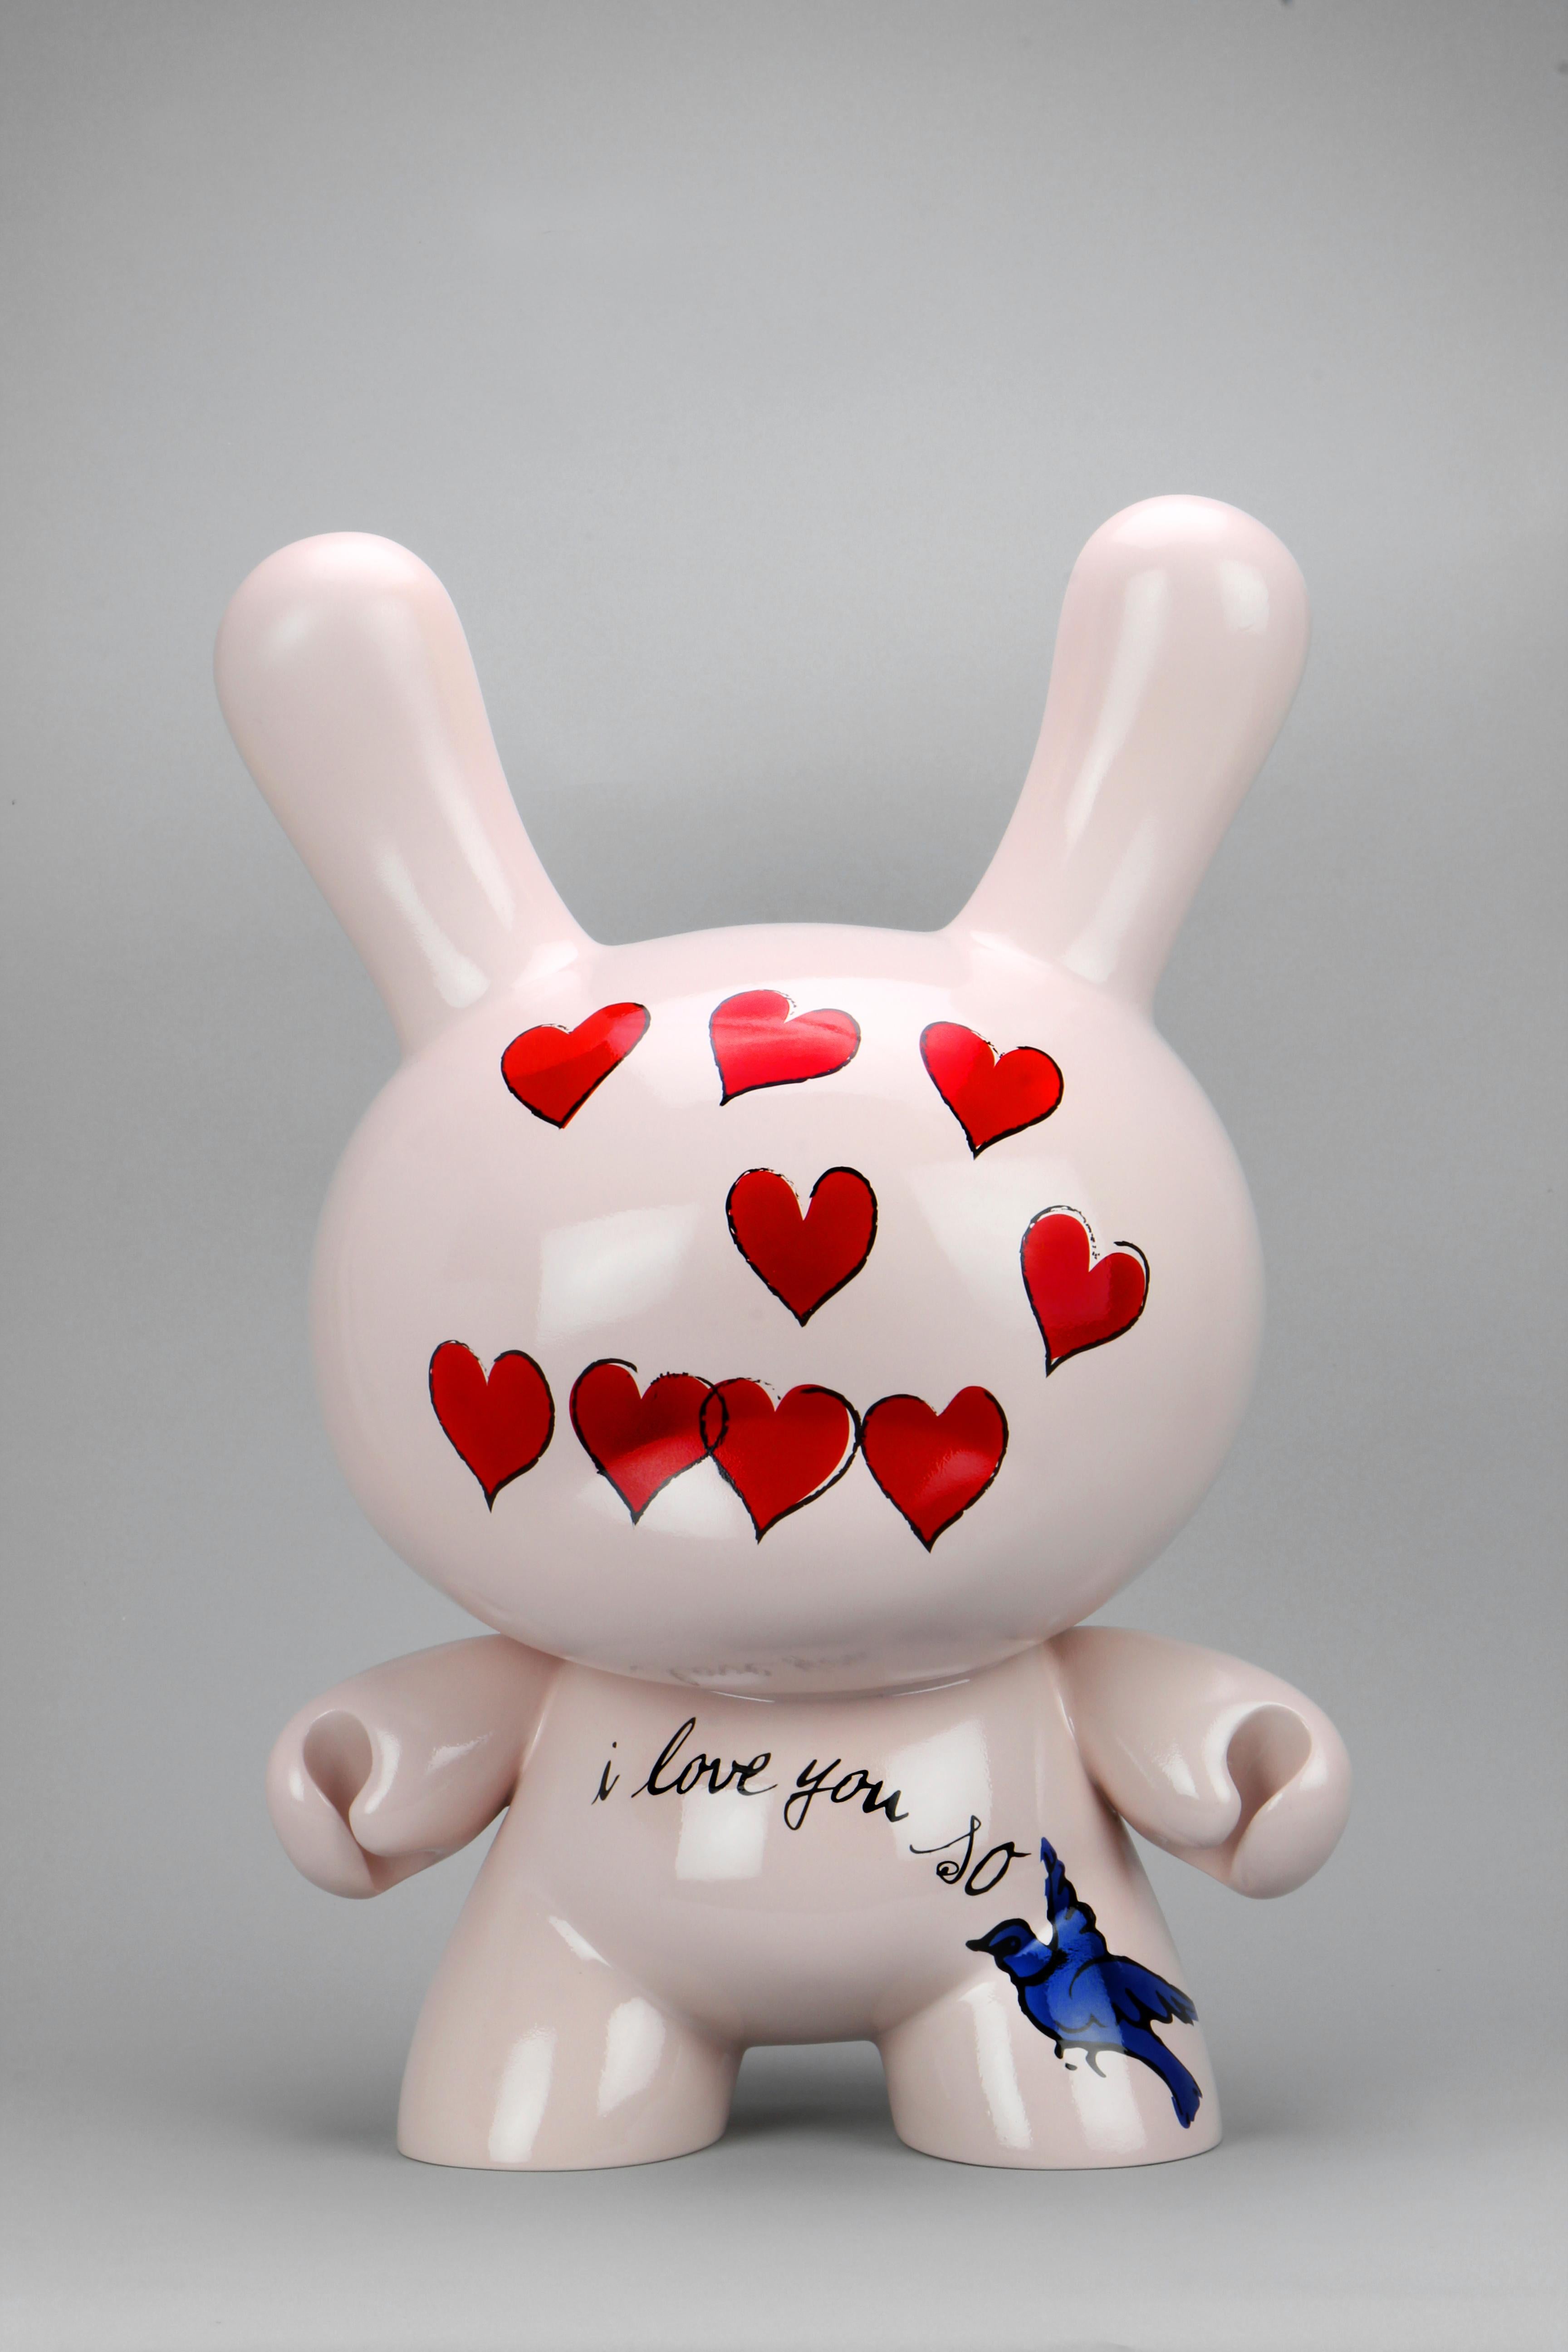 (after) Andy Warhol Figurative Sculpture - Kidrobot X Andy Warhol Foundation 4 ft "I Love You" Dunny Sculpture 